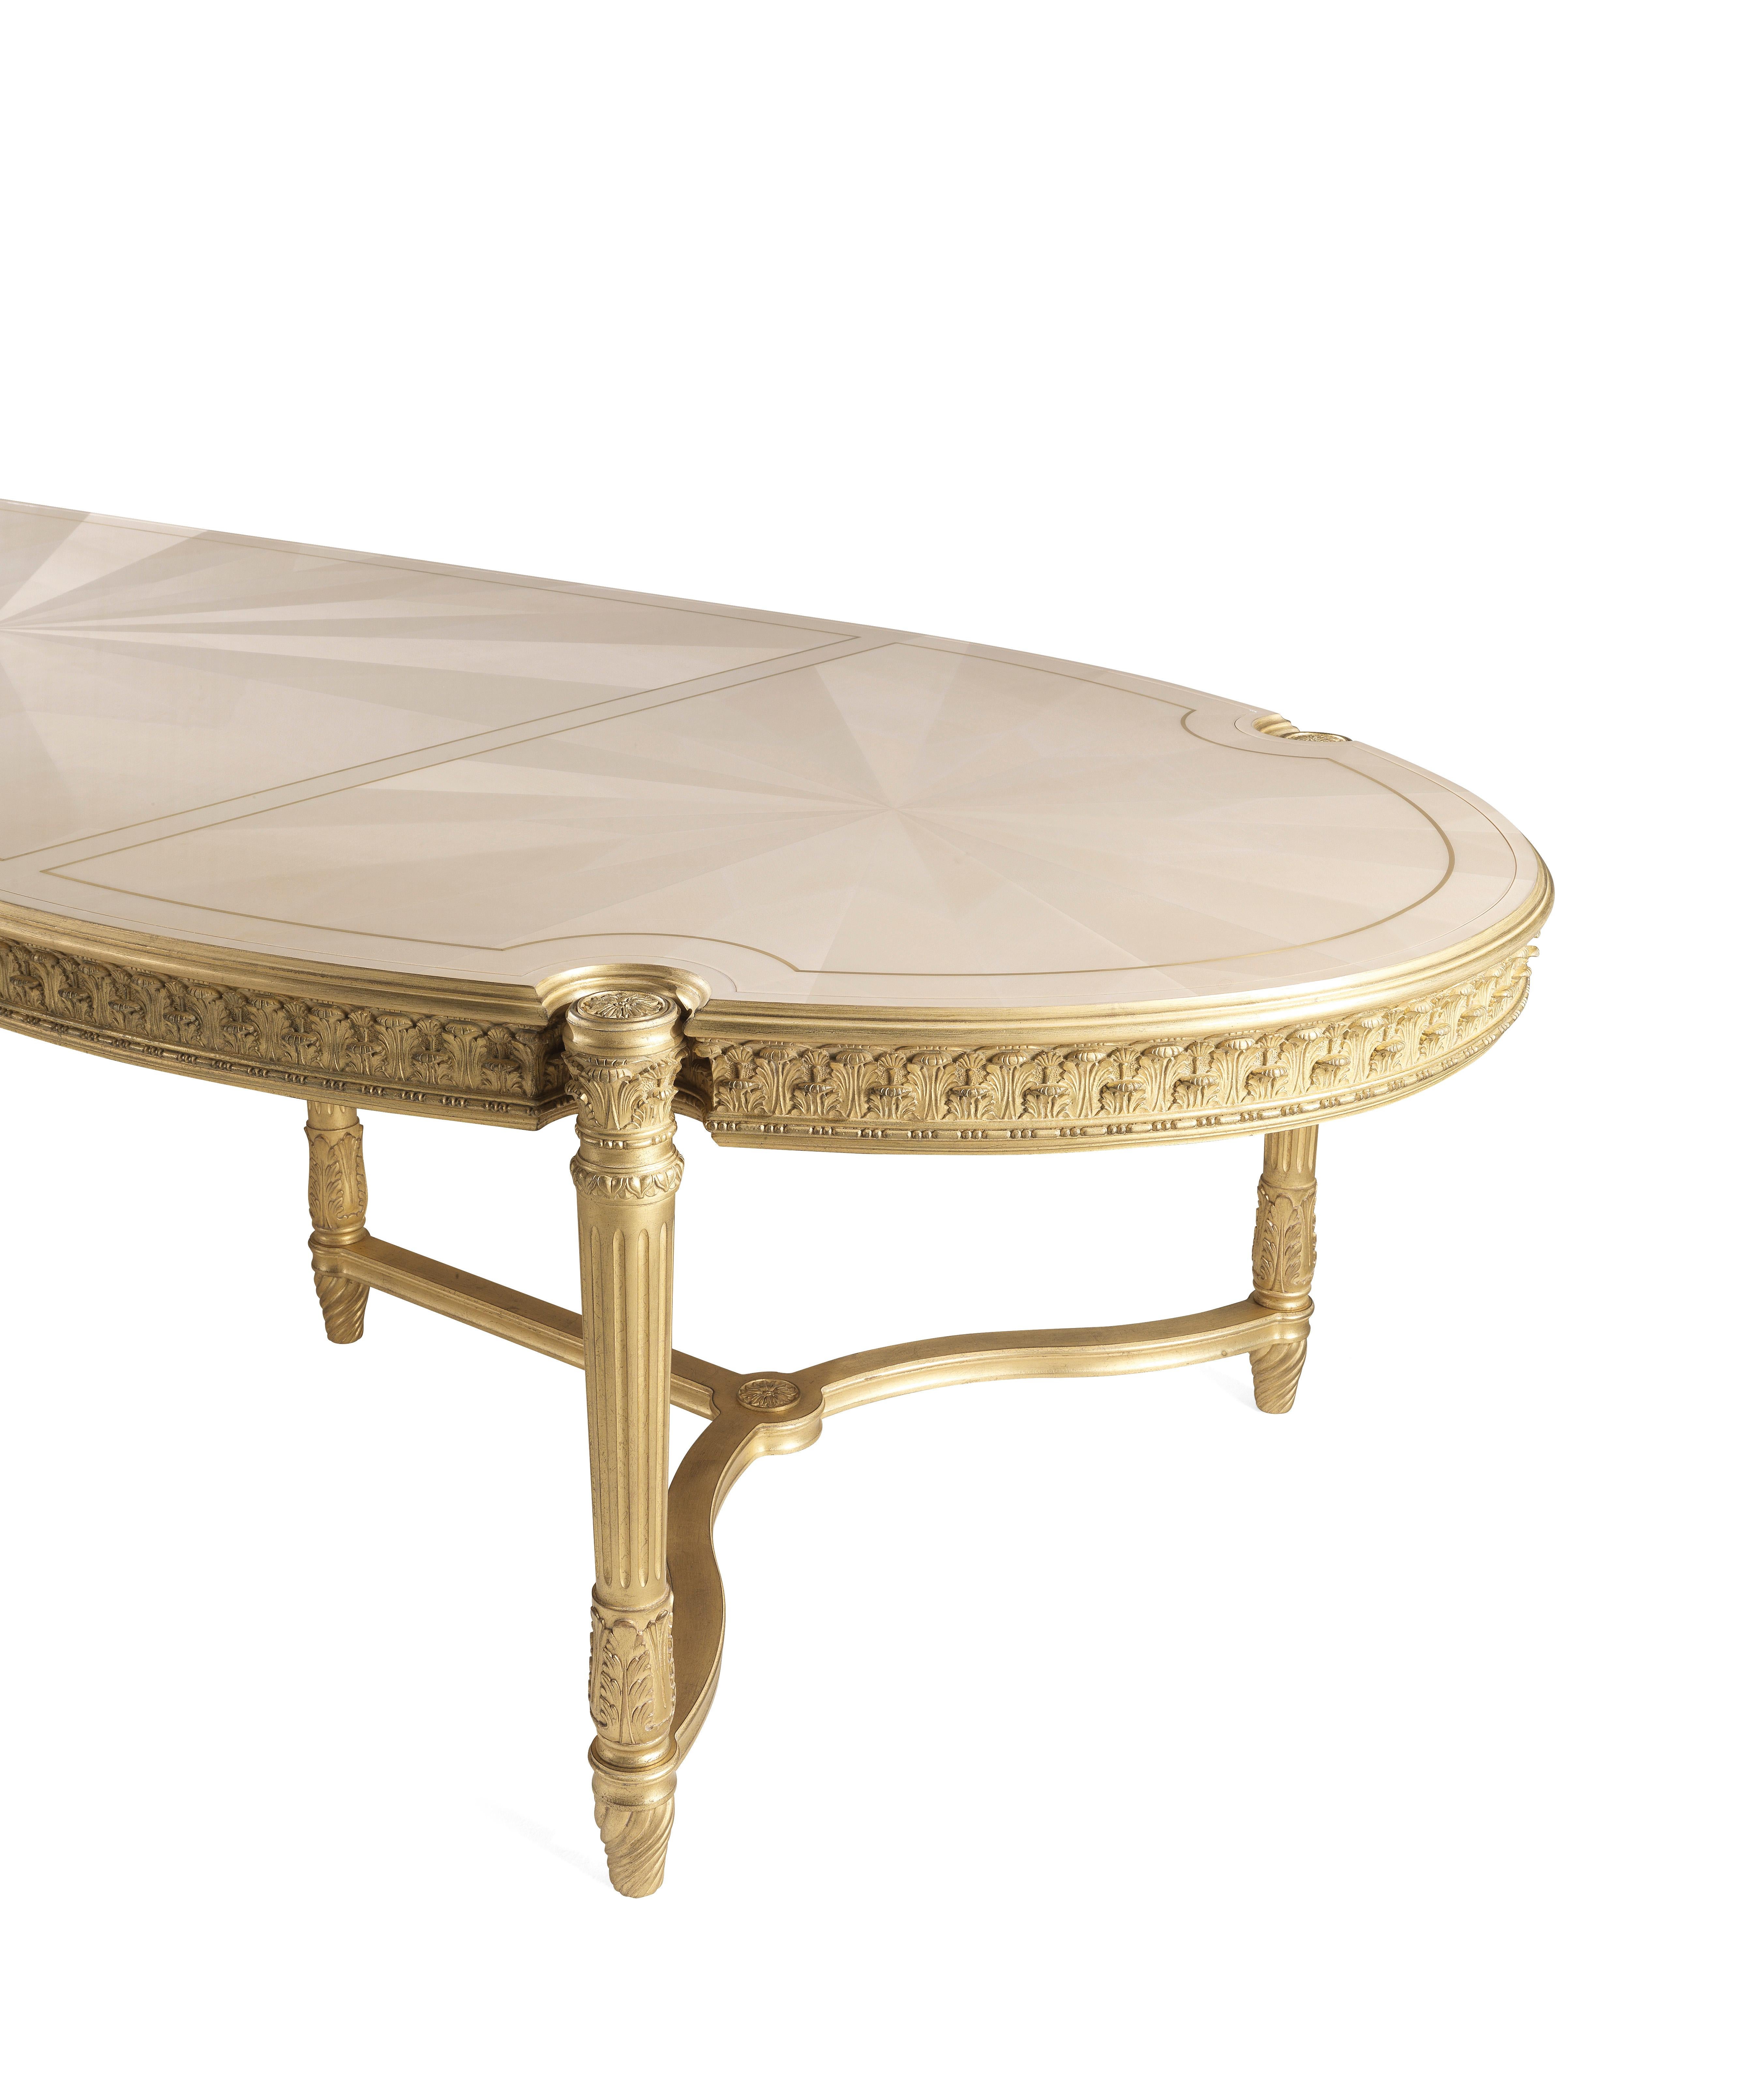 21st Century Boulevard Dining Table with Hand-carved Legs in style of Louis XVI In New Condition For Sale In Cantù, Lombardia